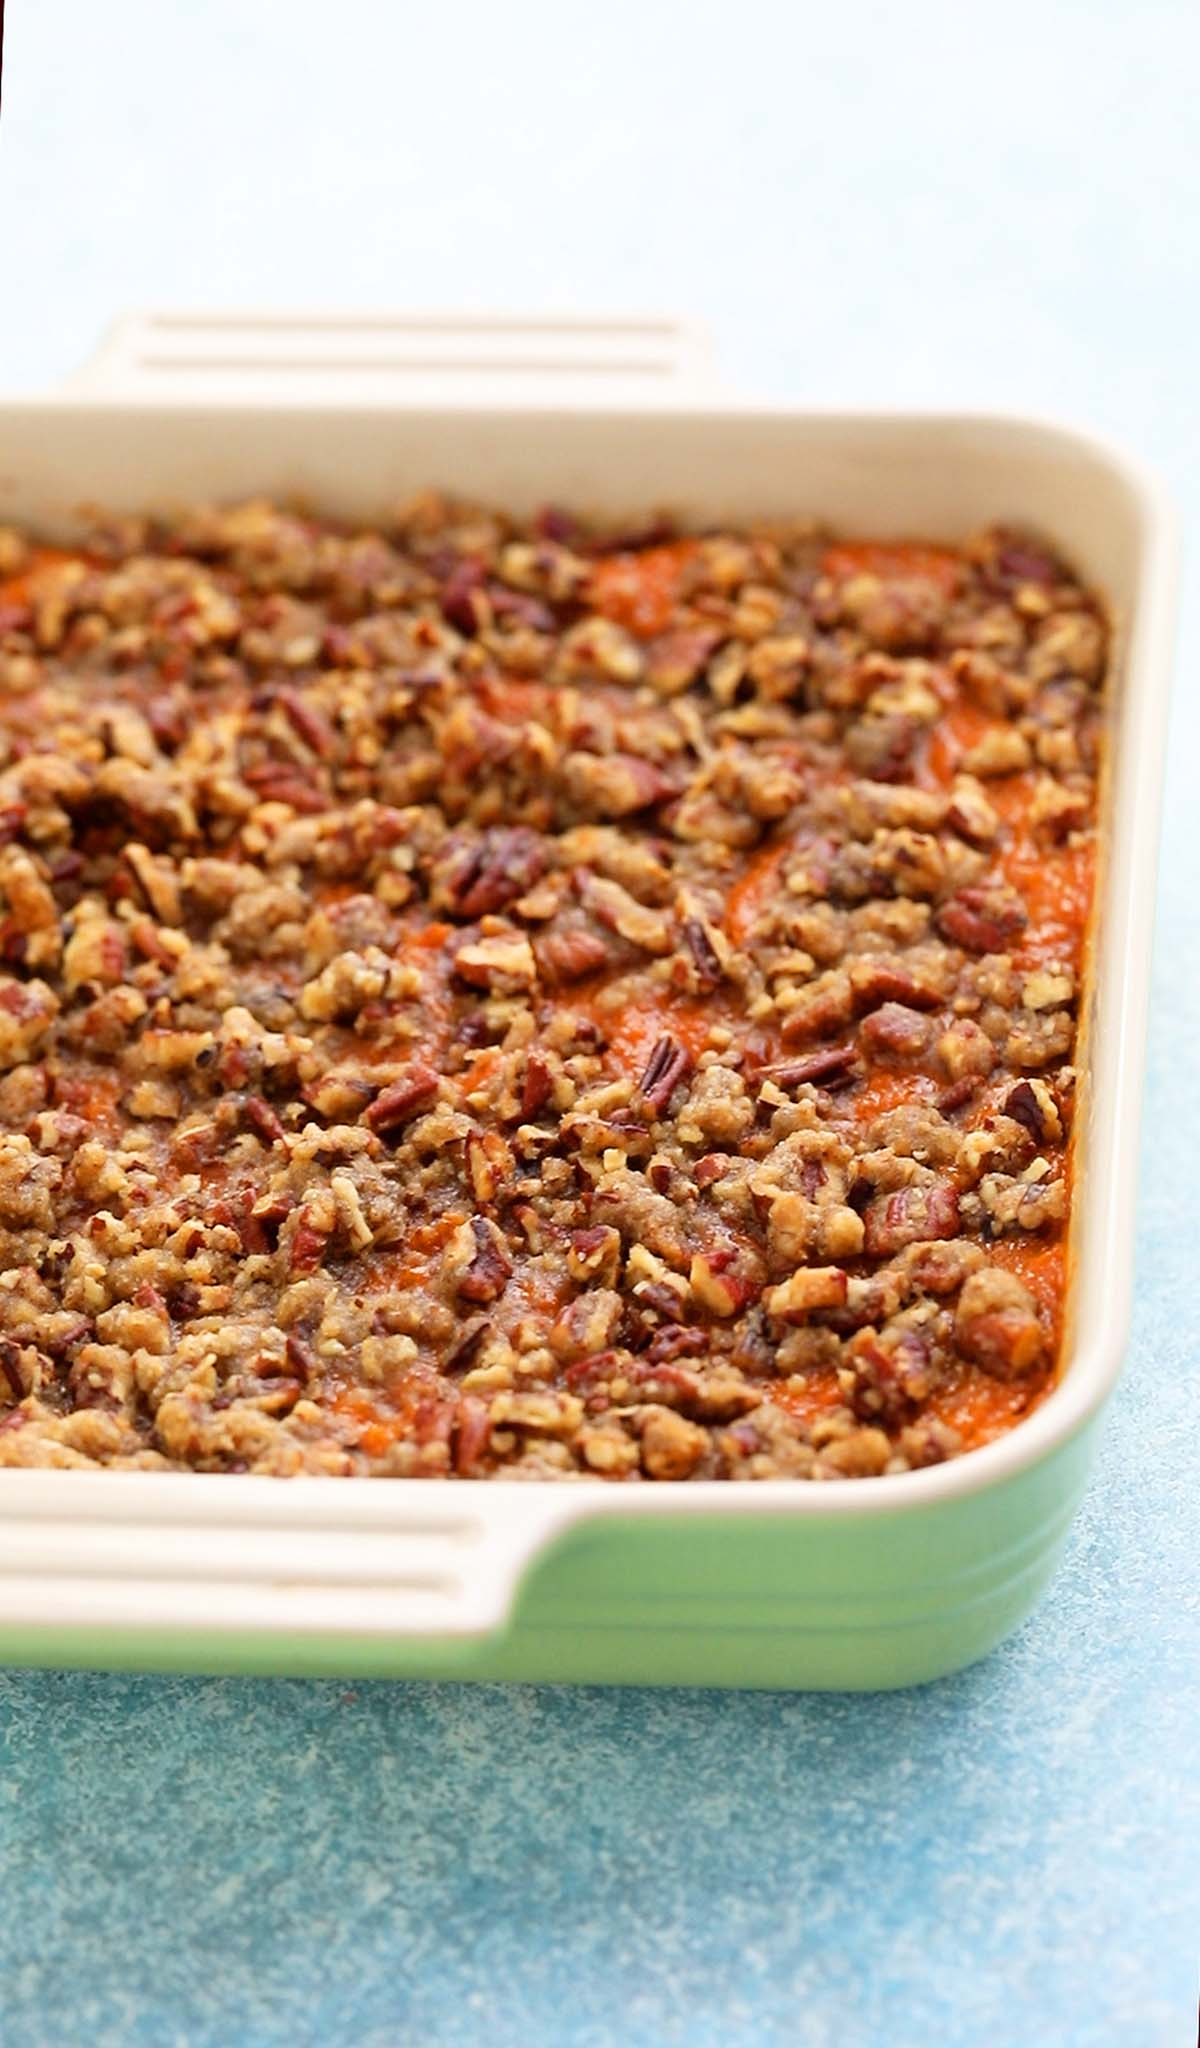 baked sweet potato souffle topped with pecans in a ceramic baking dish.